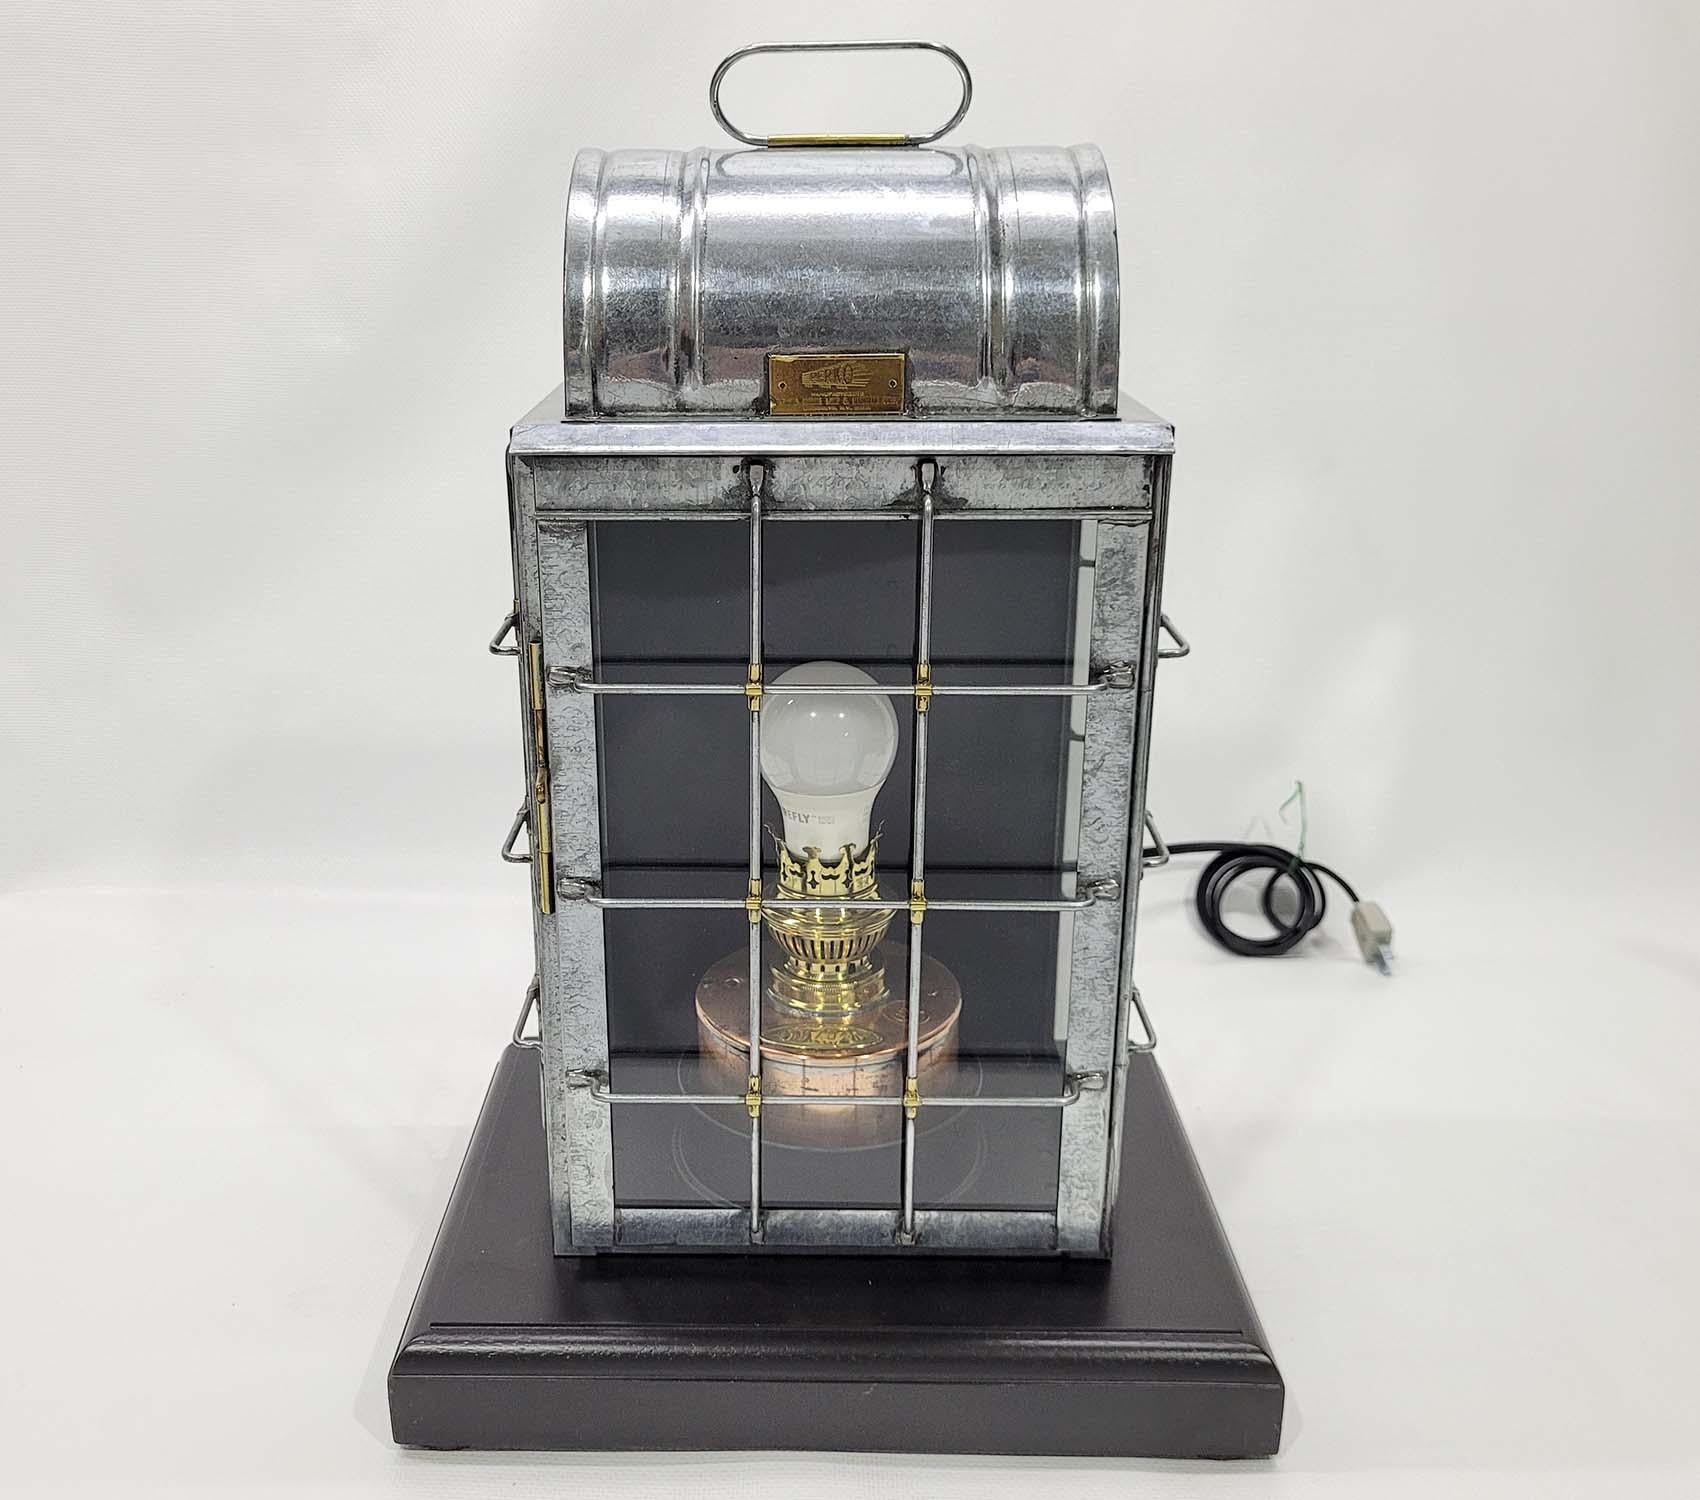 North American Industrial Lighting Ships Lantern For Sale